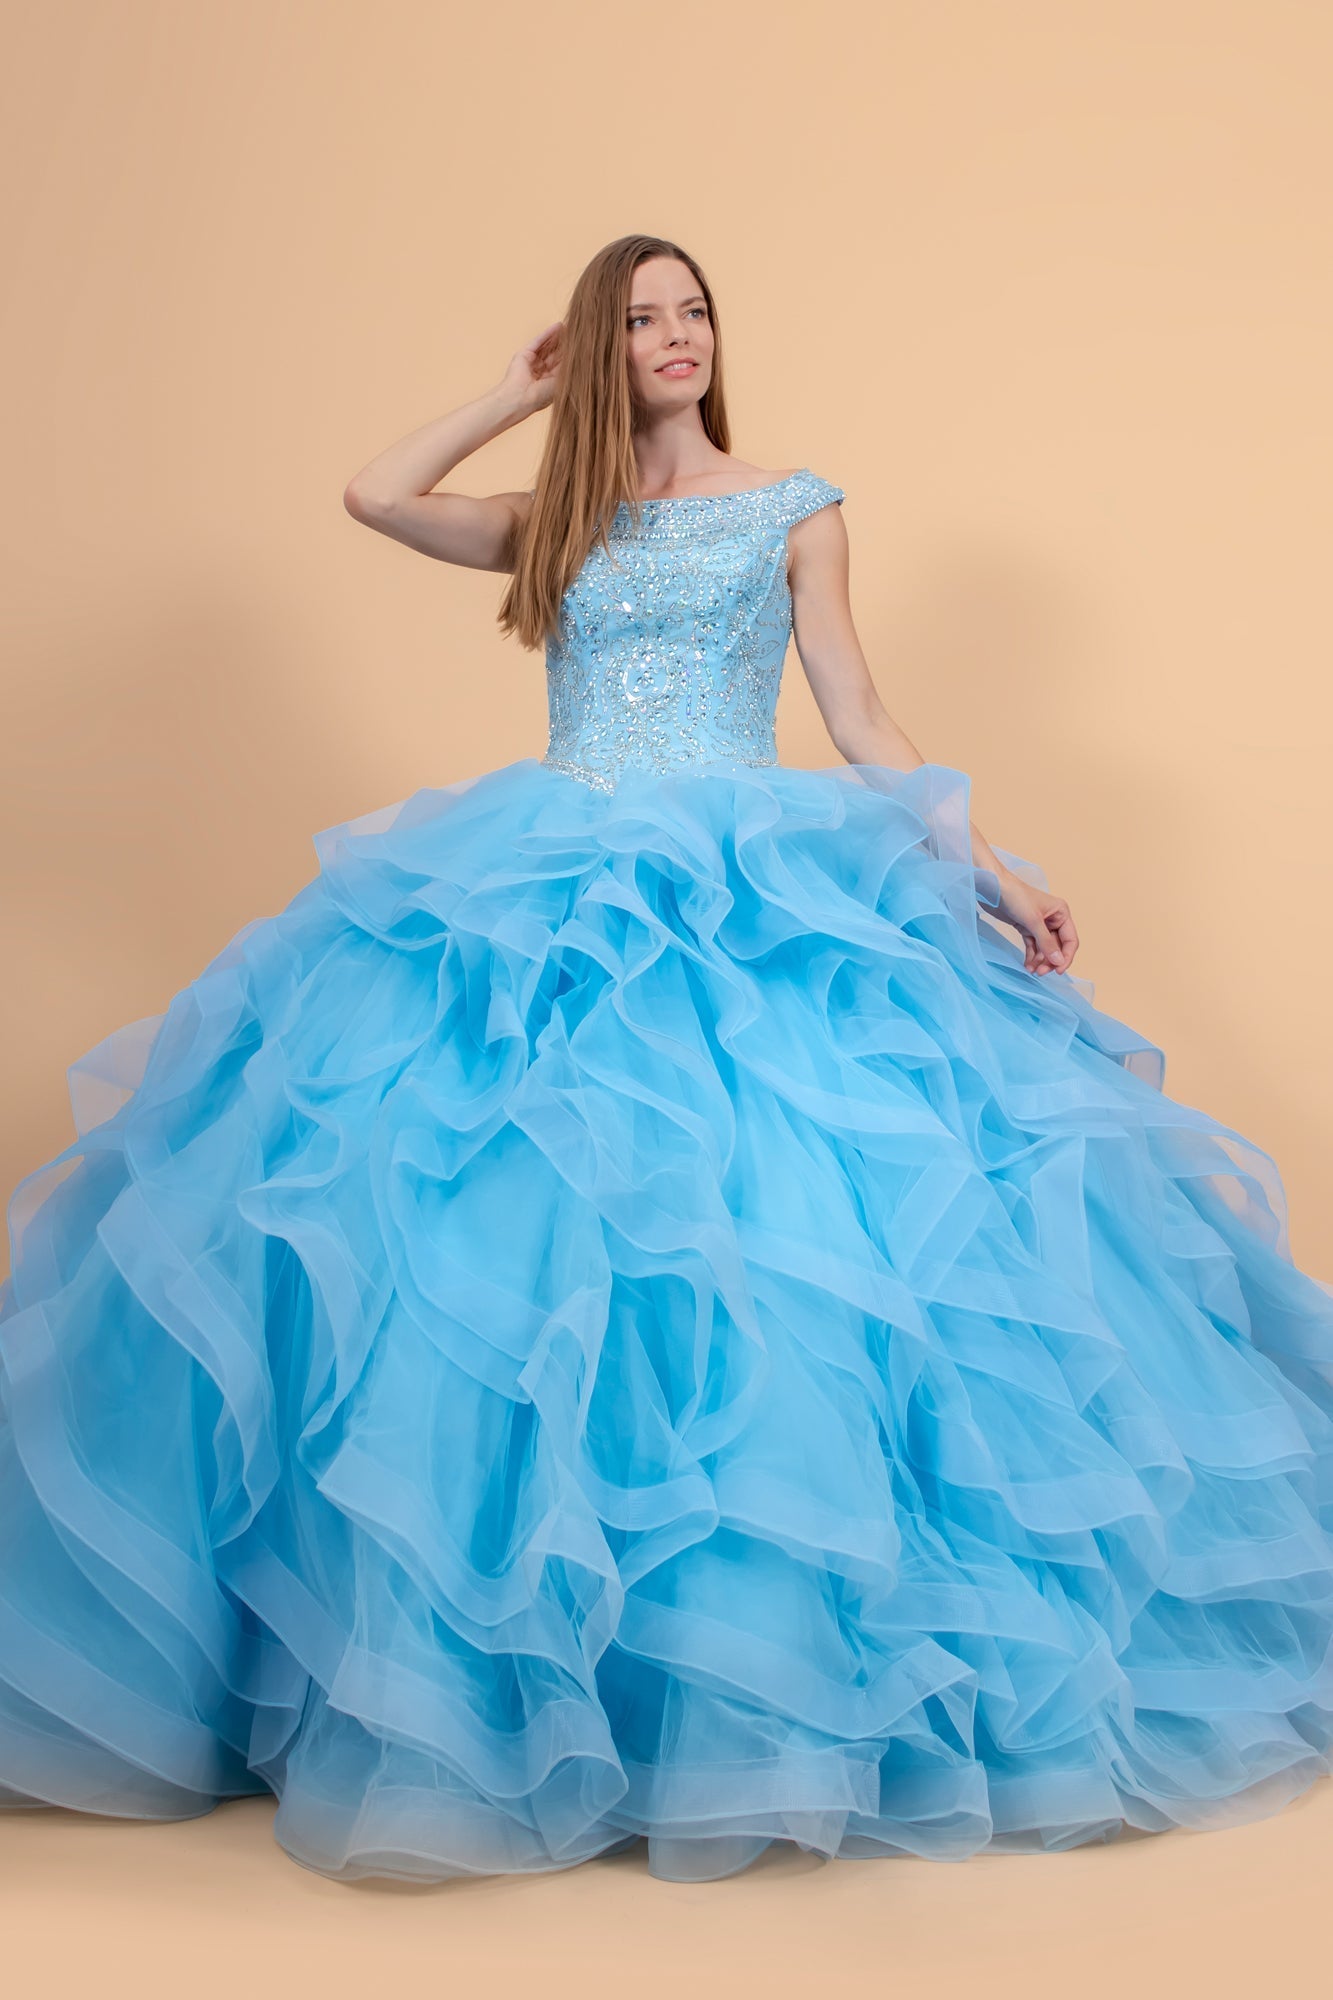 Jewel Embellished Bodice Tulle Quinceanera Dress GLGL1600 Elsy Style QUINCEANERA